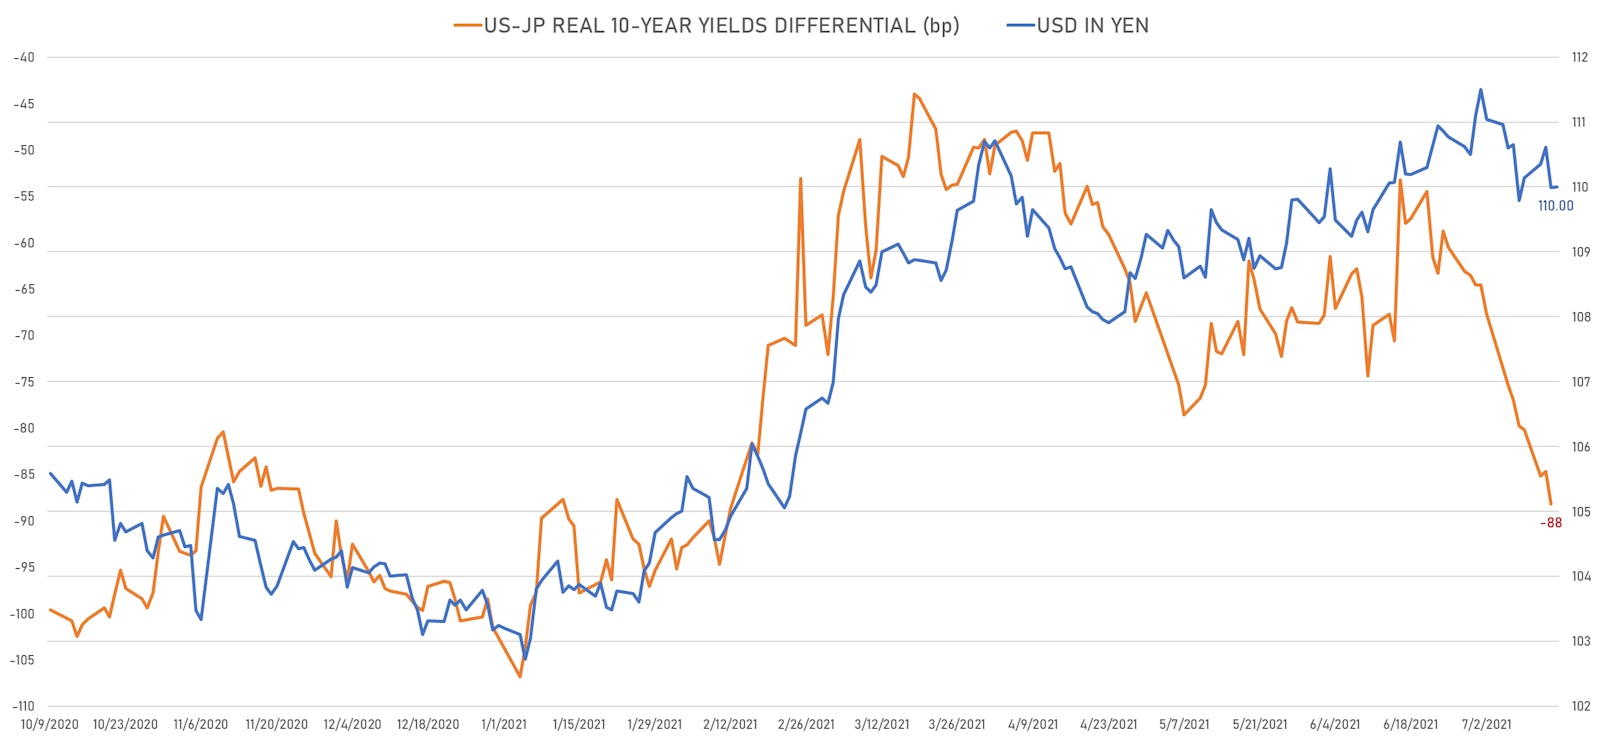 Japanese Yen vs 10Y US-JP Real Rates Differential | Sources: ϕpost, Refinitiv data